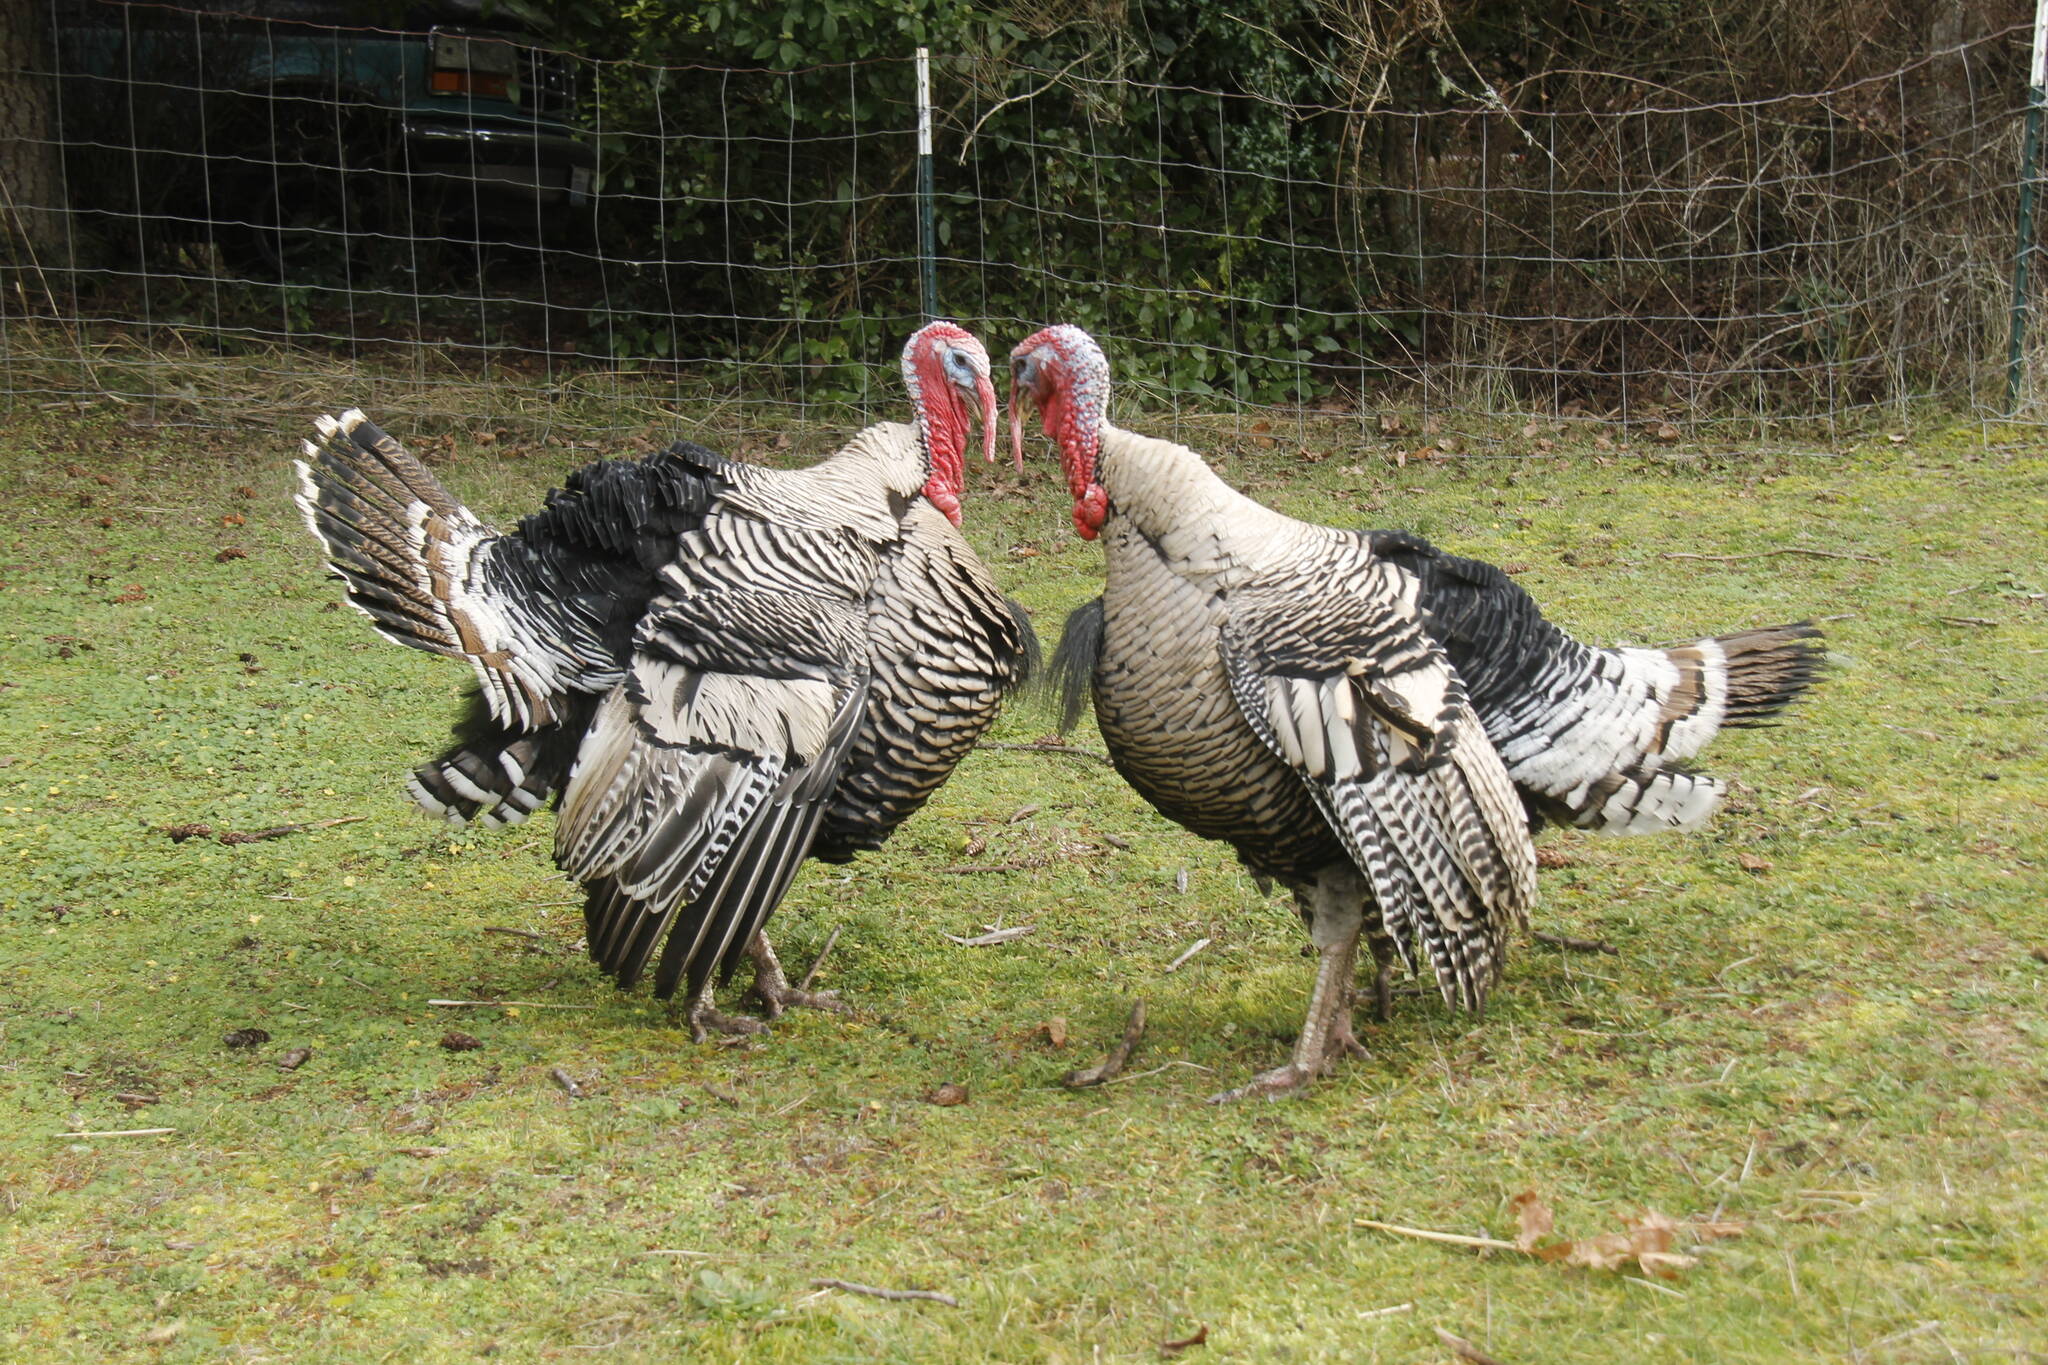 Turkeys Thunder and Lightning Bolt at Sweetwater Farm. (Photo by Kira Erickson/South Whidbey Record)